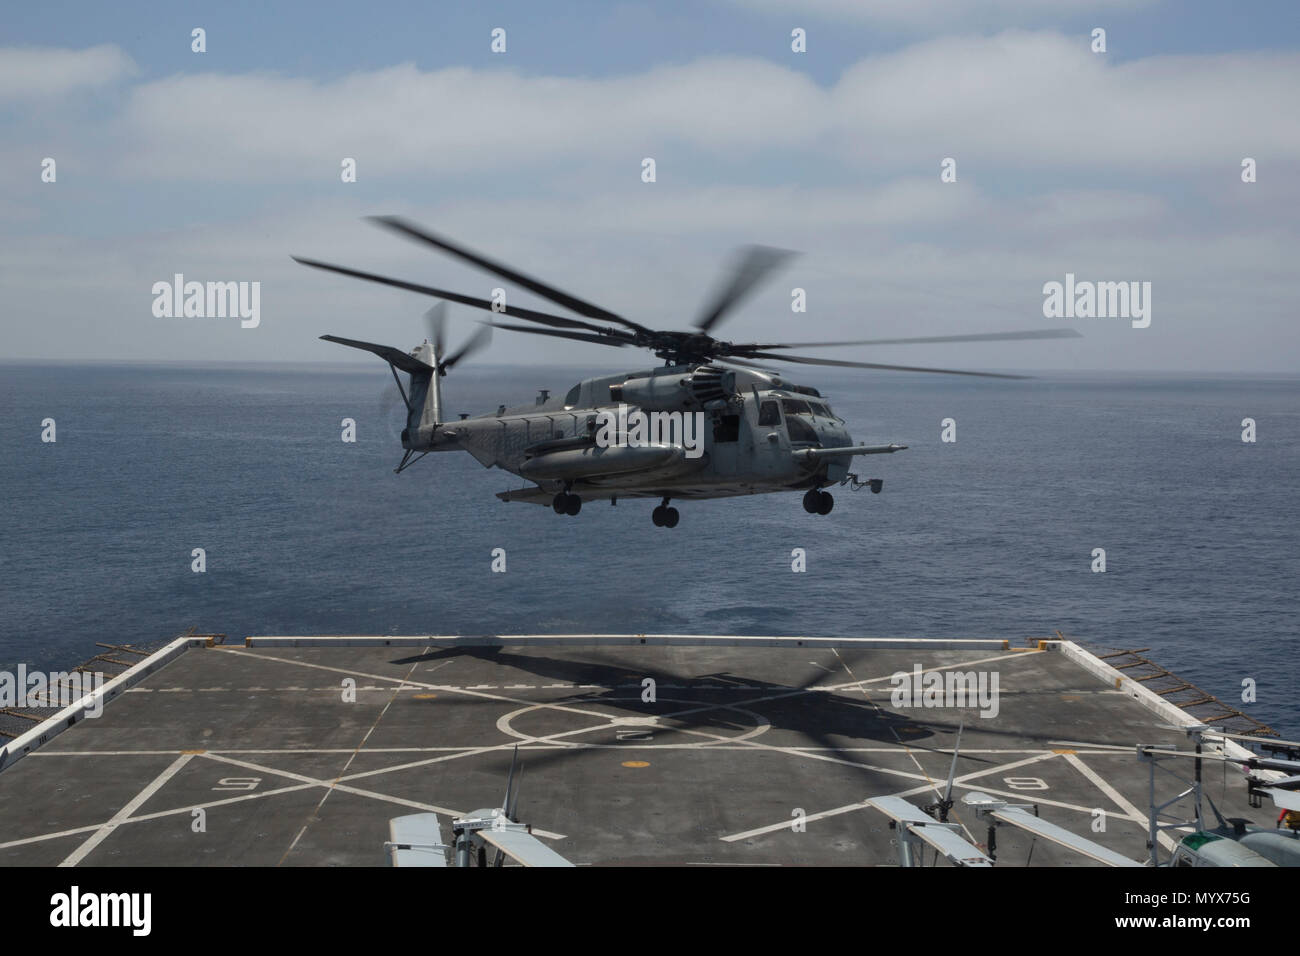 U.S. Marines in a CH-53E Super Stallion with Marine Medium Tiltrotor Squadron 166 Reinforced, 13th Marine Expeditionary Unit (MEU), takes off while at sea aboard the San Antonio-class amphibious transport dock ship USS Anchorage (LPD 23), June 3, 2018. The Essex Amphibious Ready Group (ARG) and 13th MEU are conducting Composite Training Unit Exercise (COMPTUEX), the final exercise before the units’ upcoming deployment. This exercise validates the ARG/MEU team’s ability to adapt and execute missions in ever-changing, unknown environments. Upon completion of COMPTUEX, the 13th MEU and Essex ARG  Stock Photo